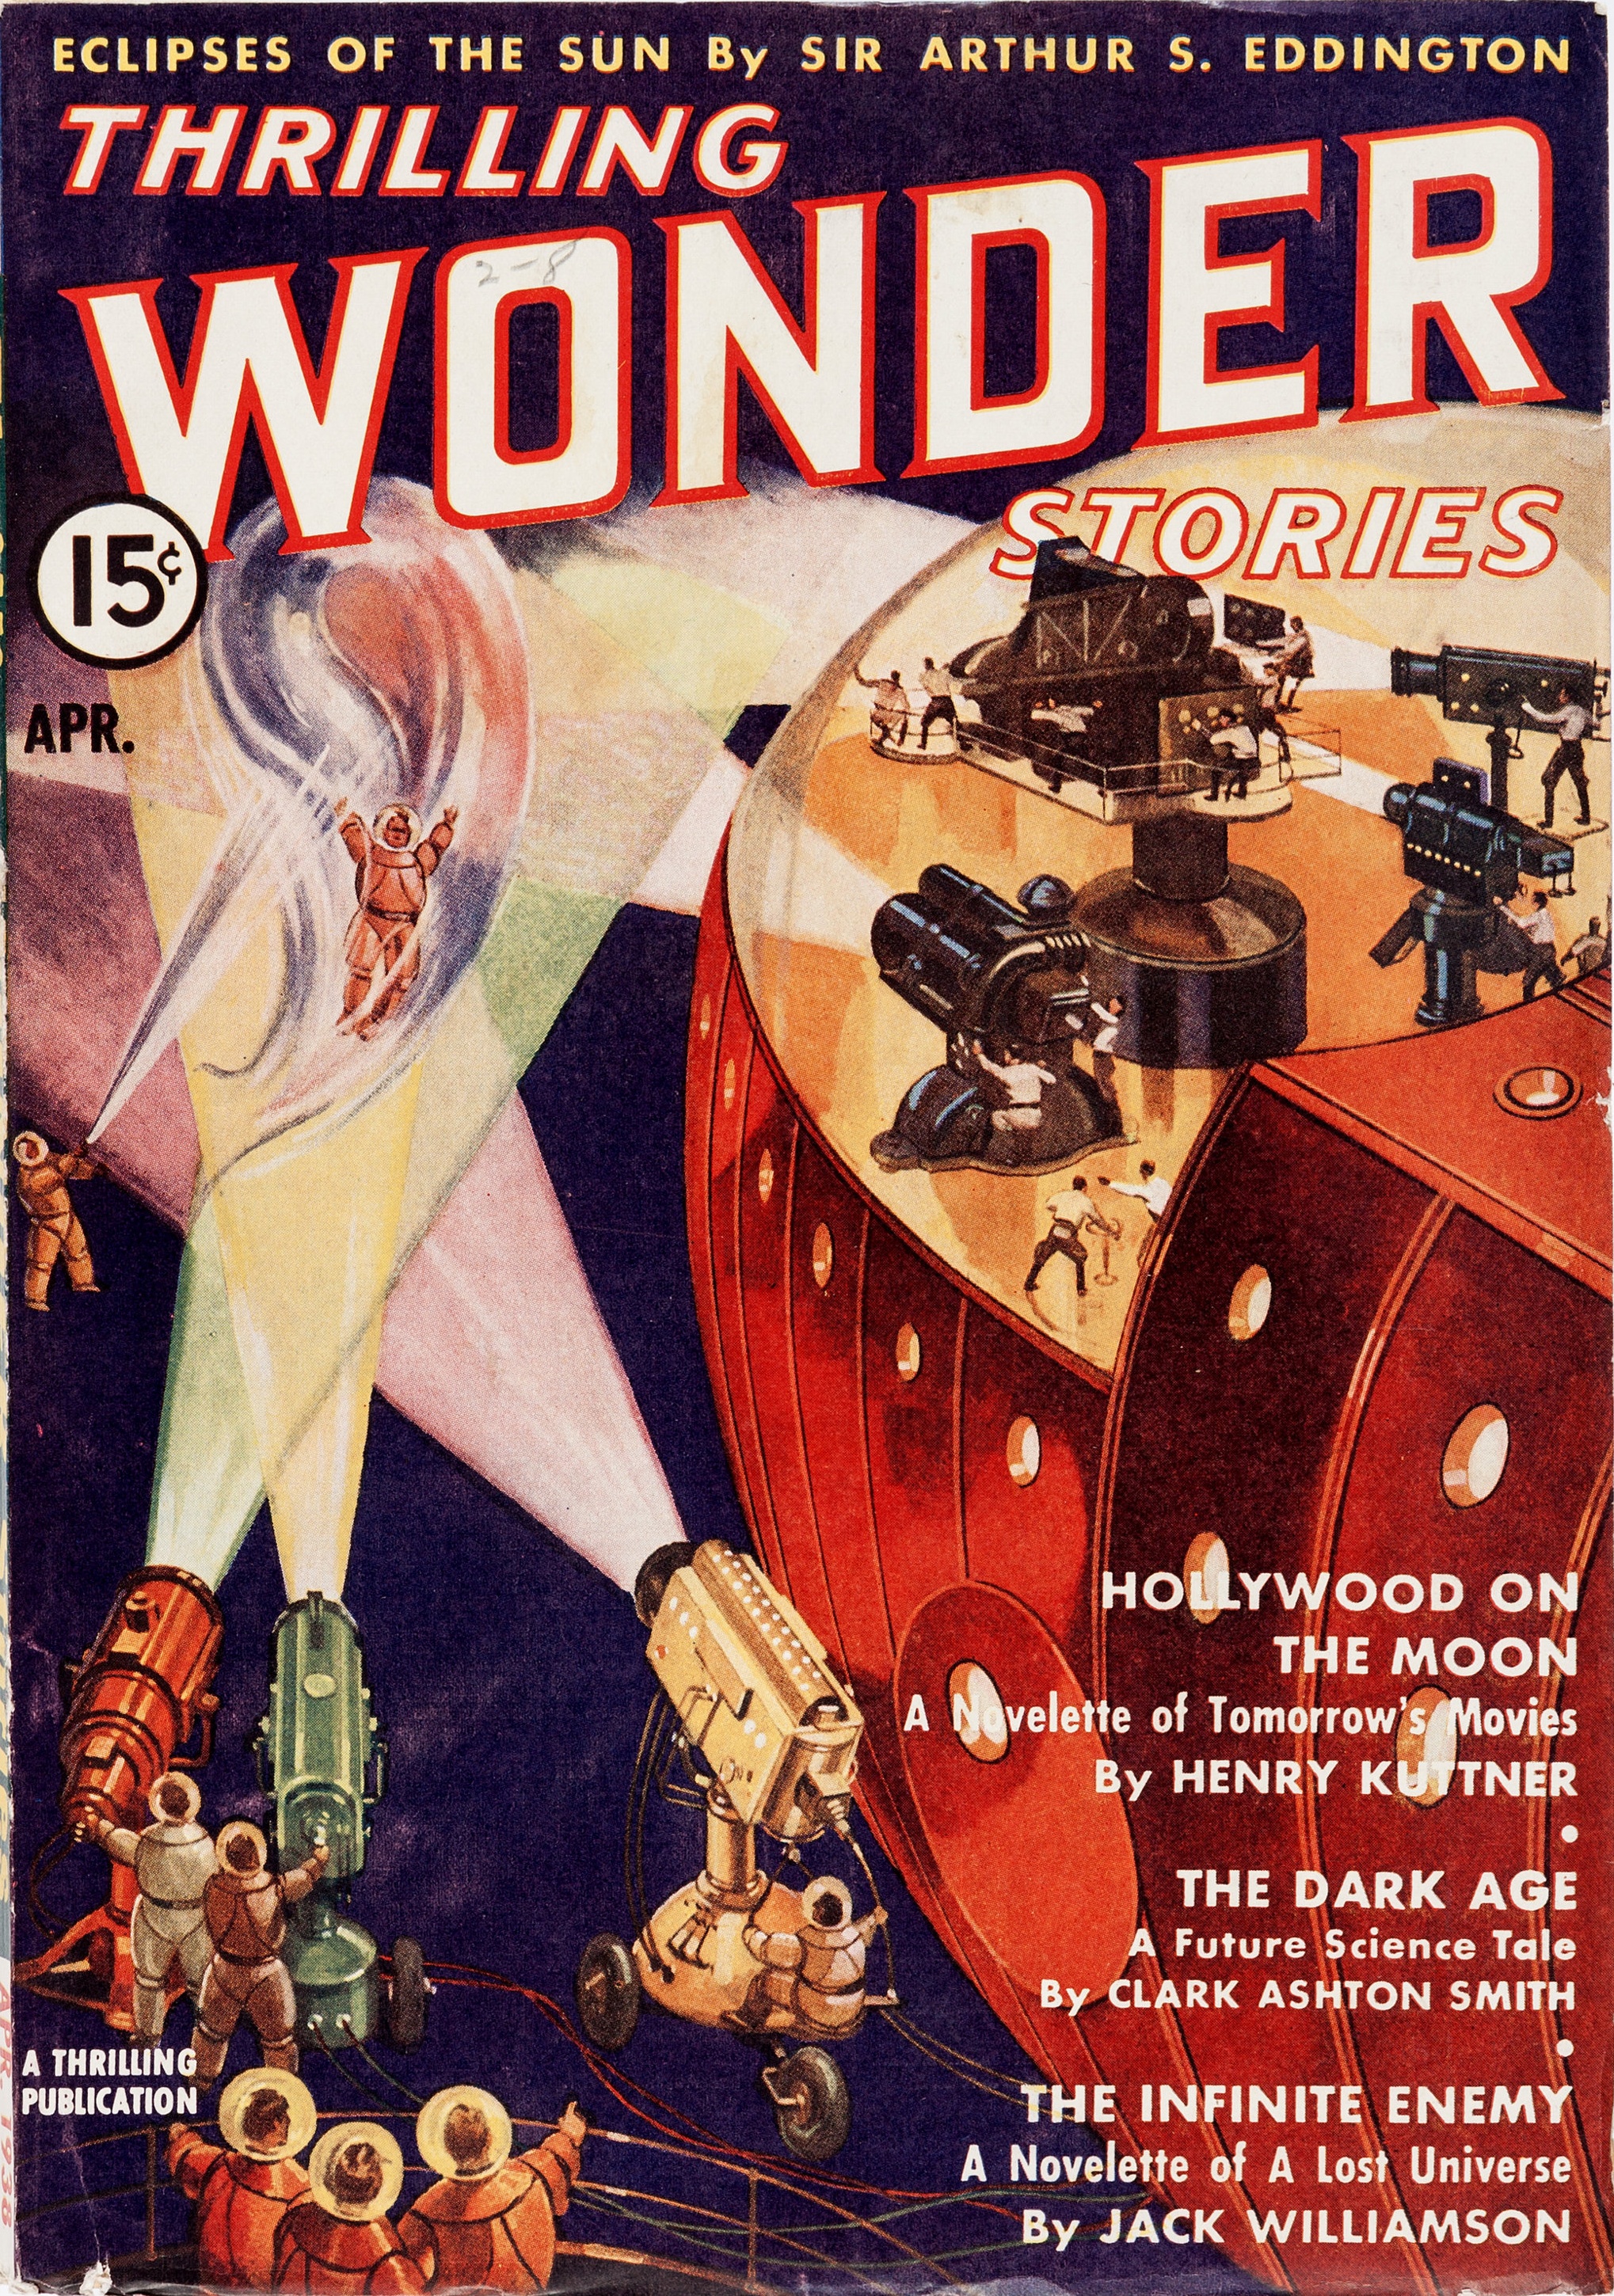 This cover story was later republished in Startling Stories, July 1949 Also...